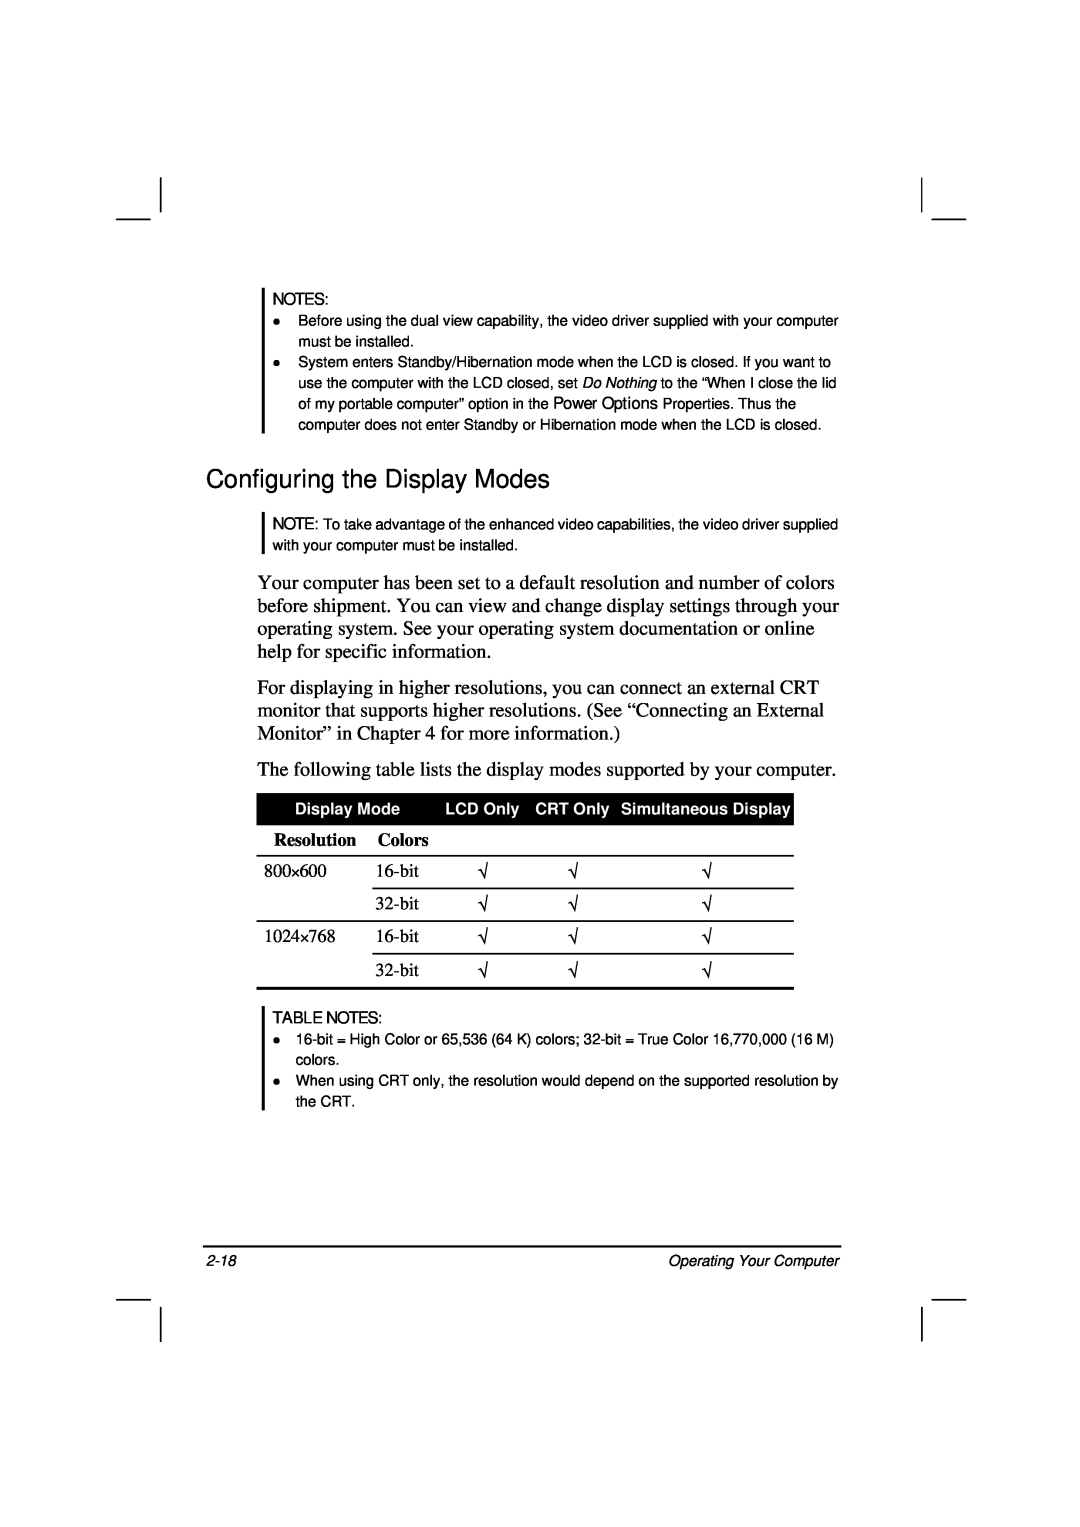 Casio HK1223 owner manual Configuring the Display Modes, Table Notes 